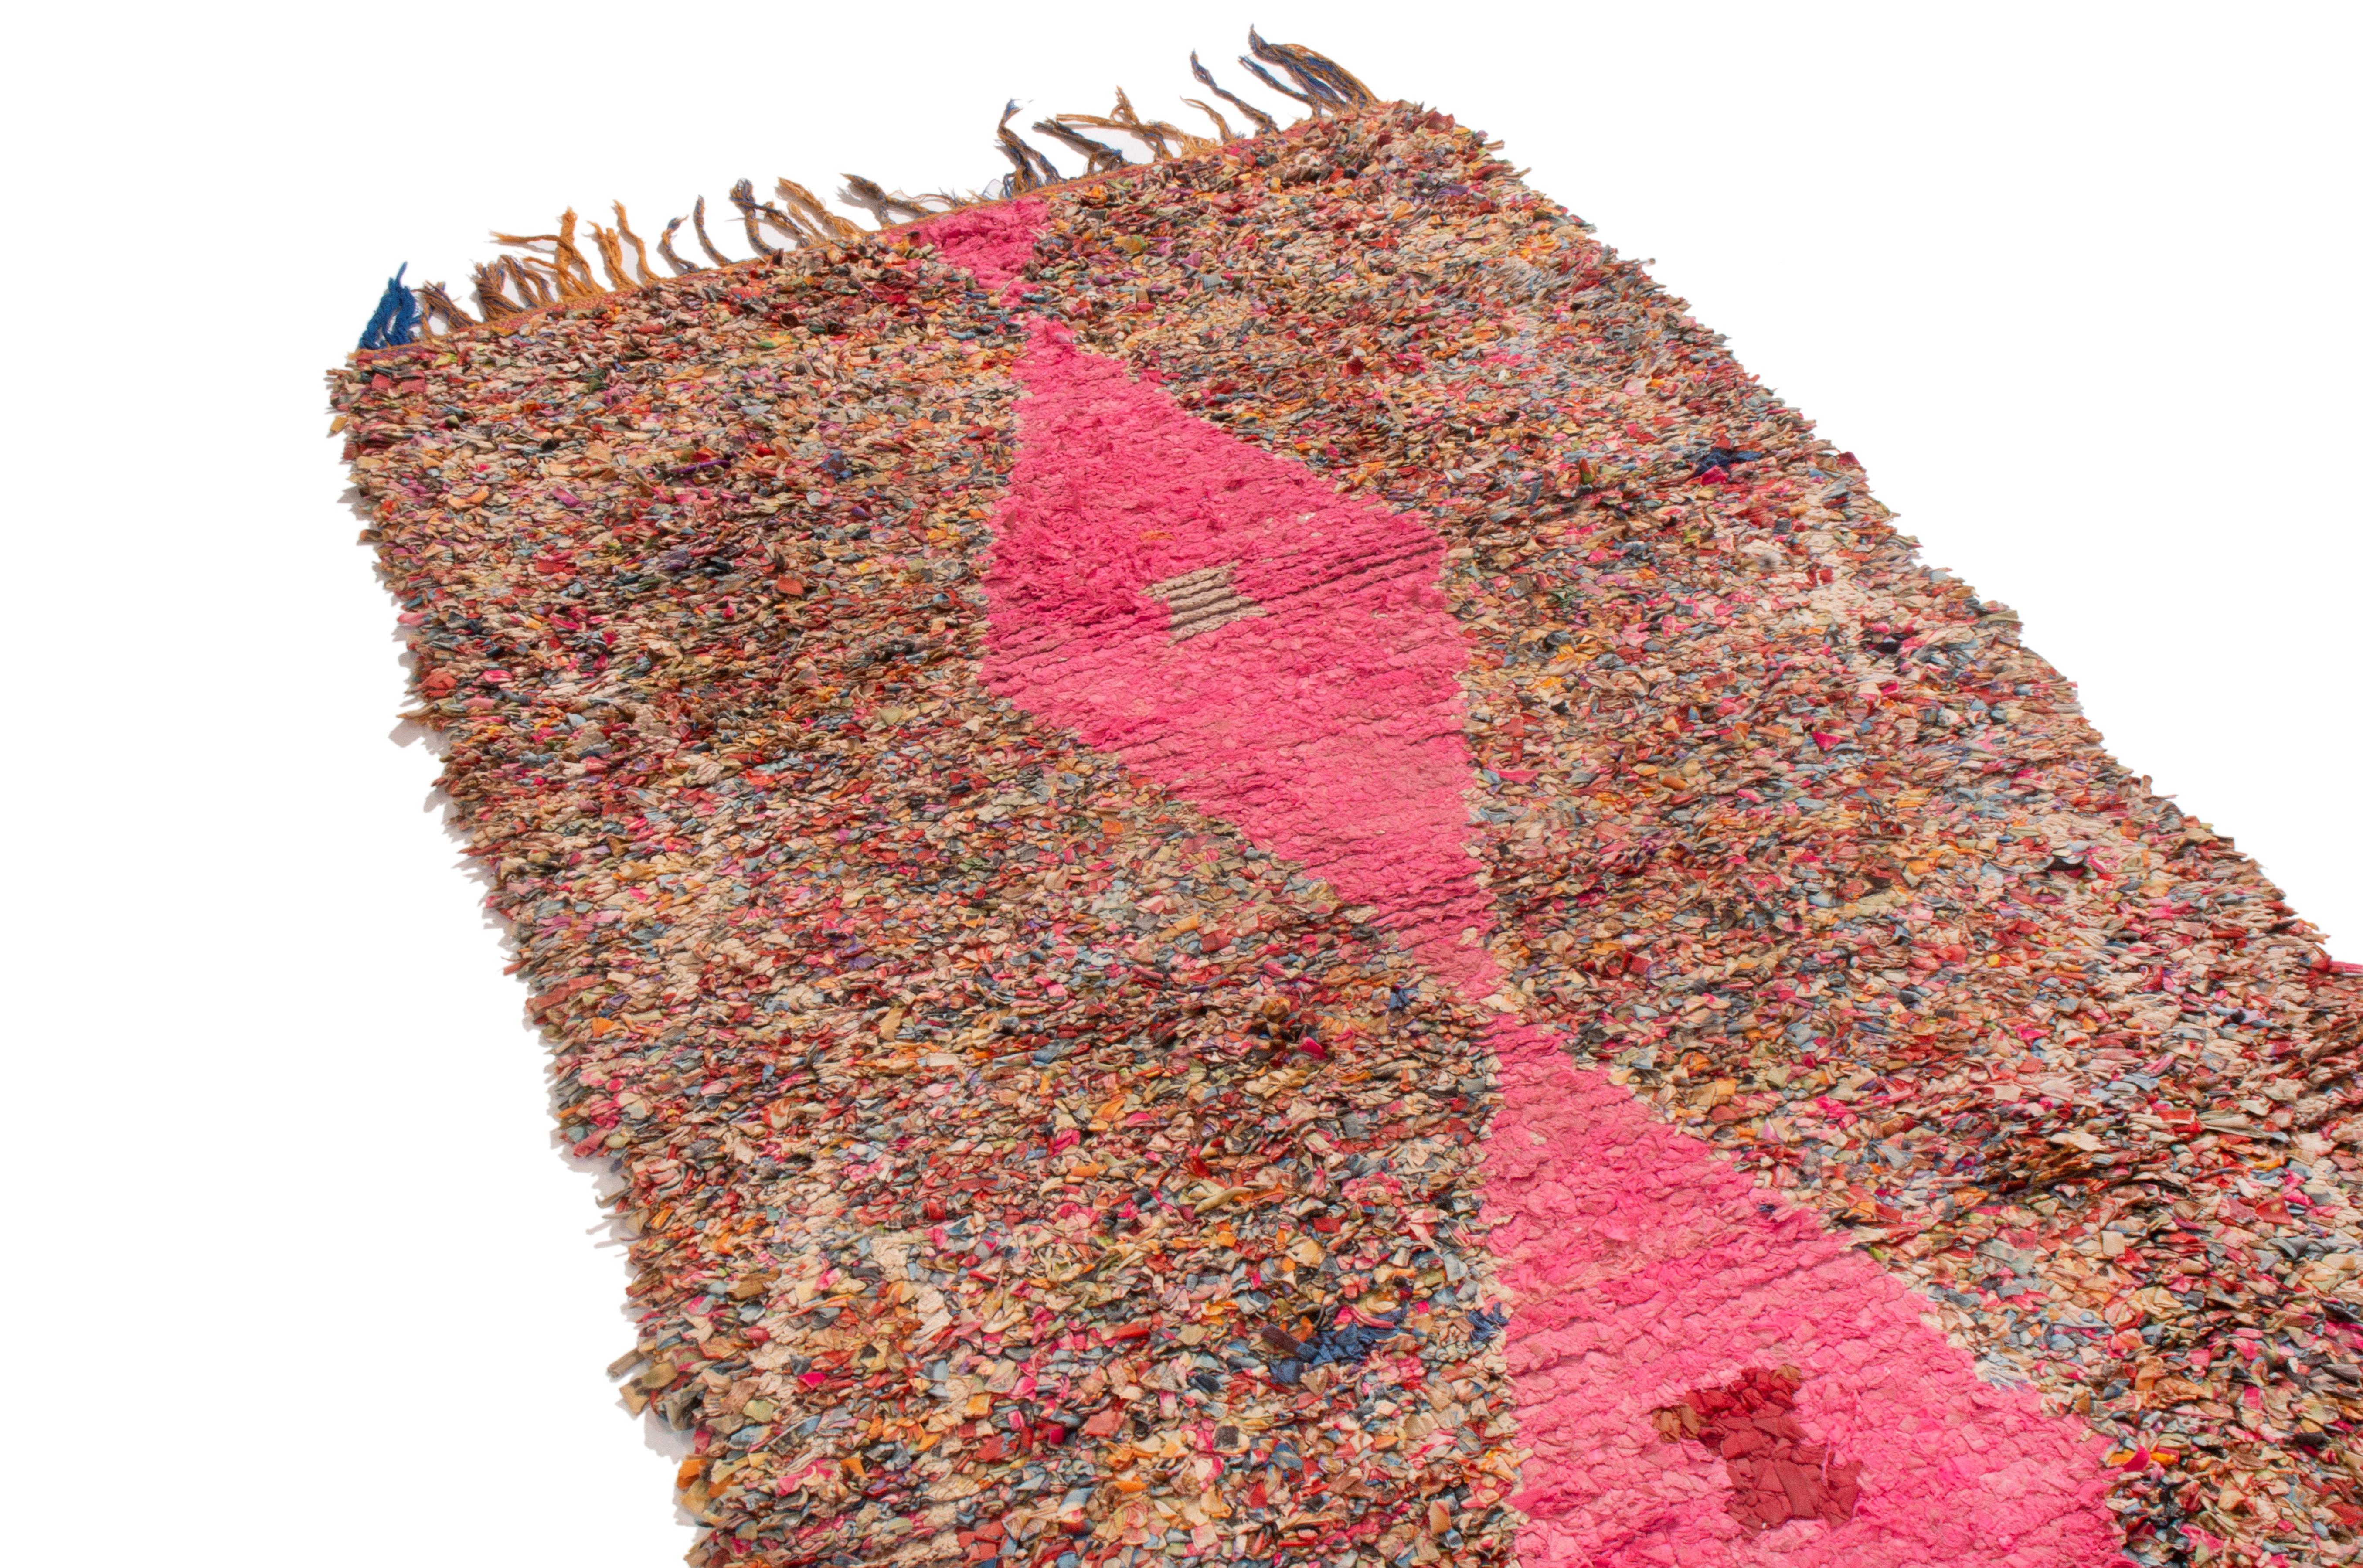 Originating from Morocco in 1950, this vintage midcentury Moroccan Berber rug has a combination of both distinct and subtle symbolism with particularly unique colorways. Hand knotted in durable wool, the eye-catching hot pink lozenges symbolizing